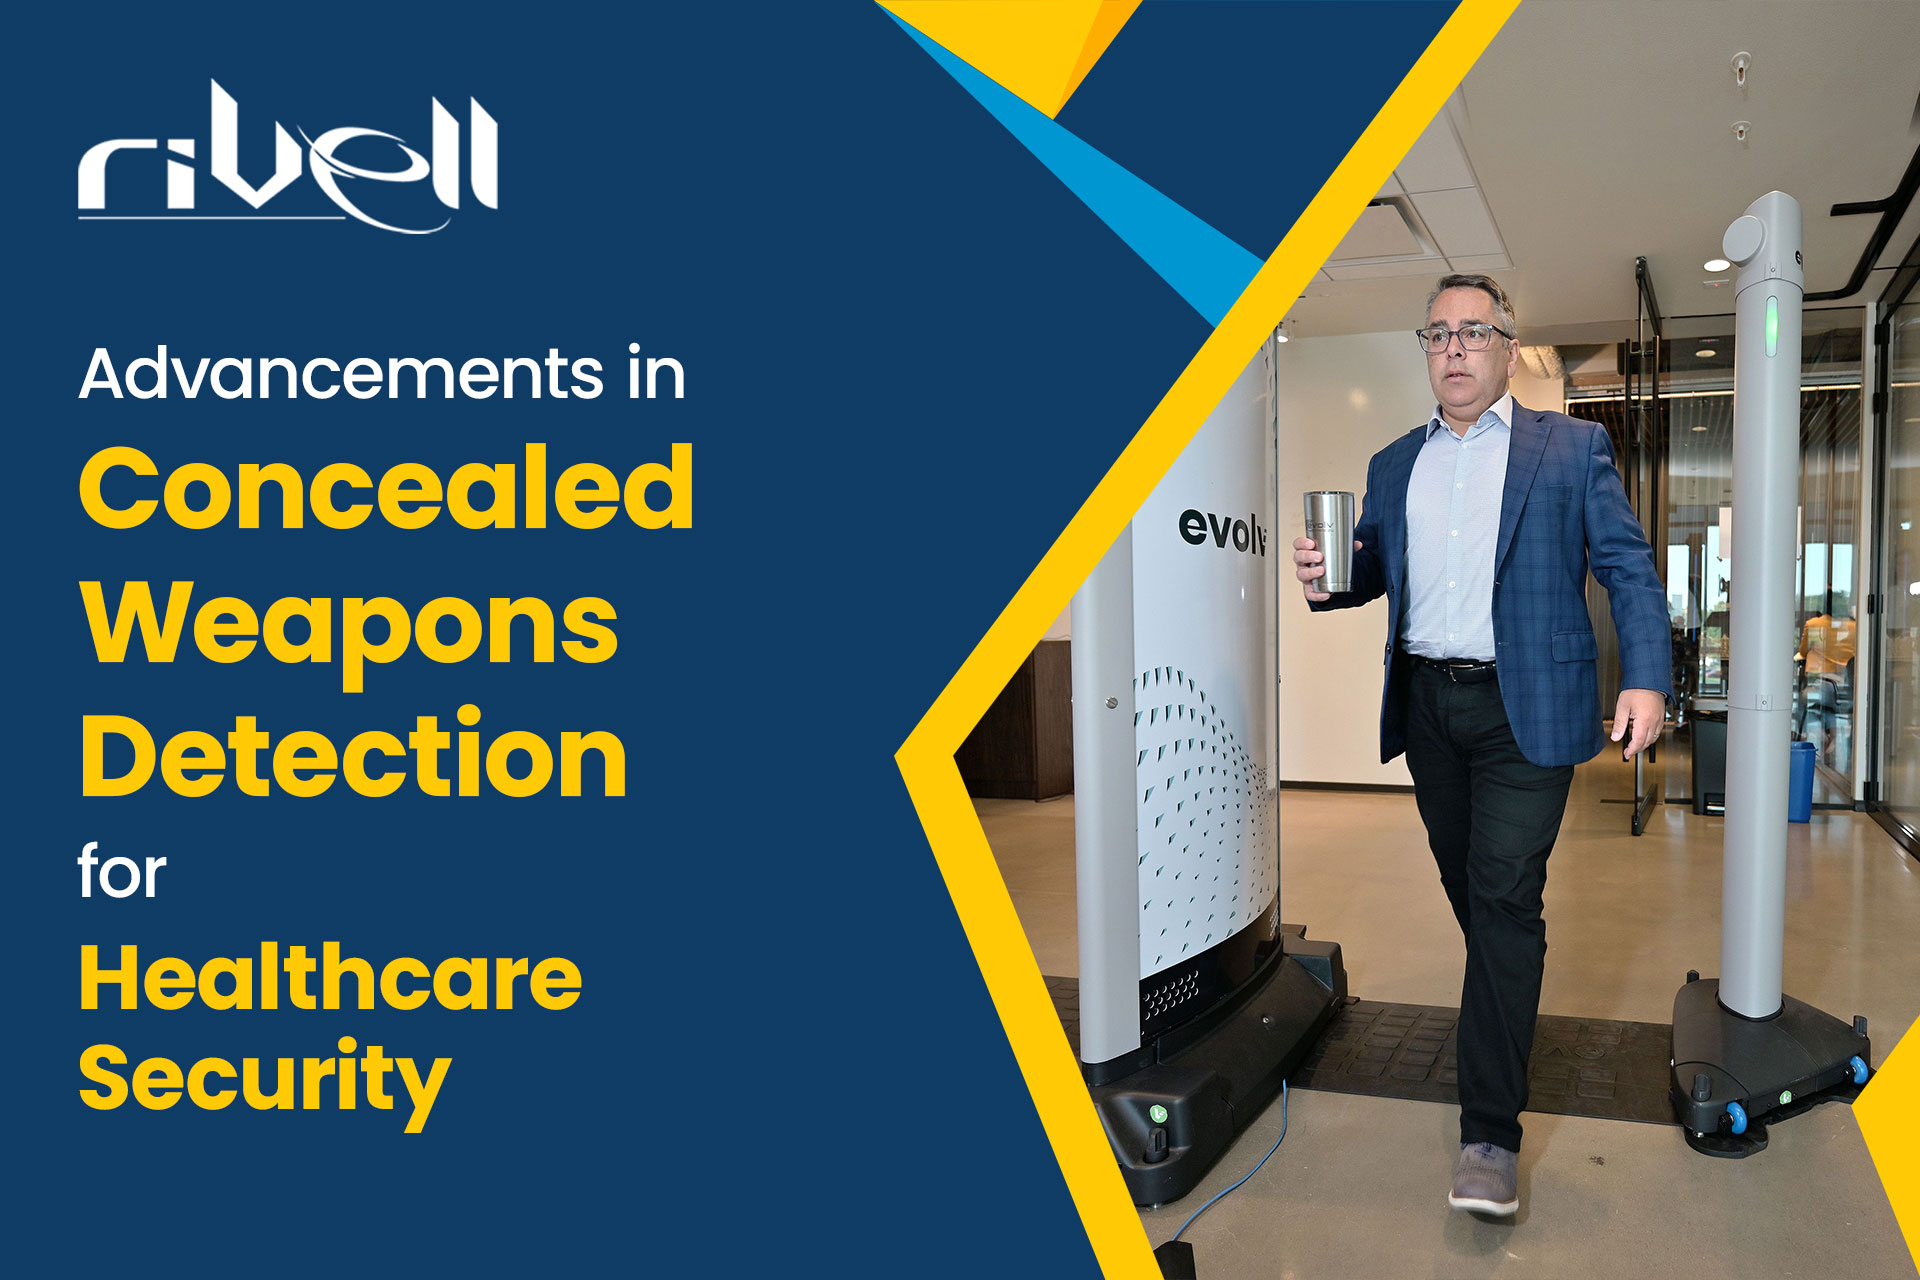 Advancements in Concealed Weapons Detection for Healthcare Security